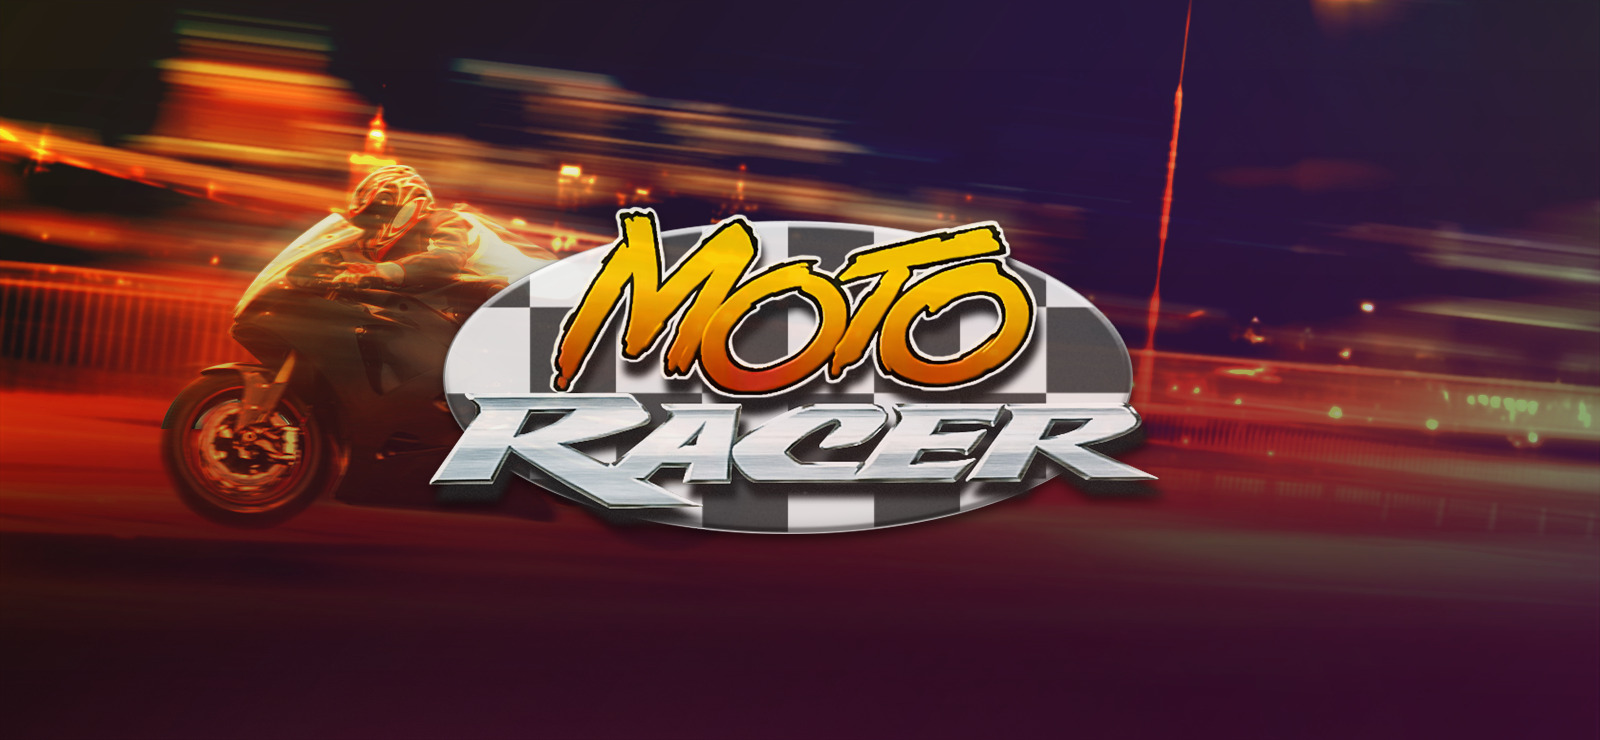 Professional Racer free downloads